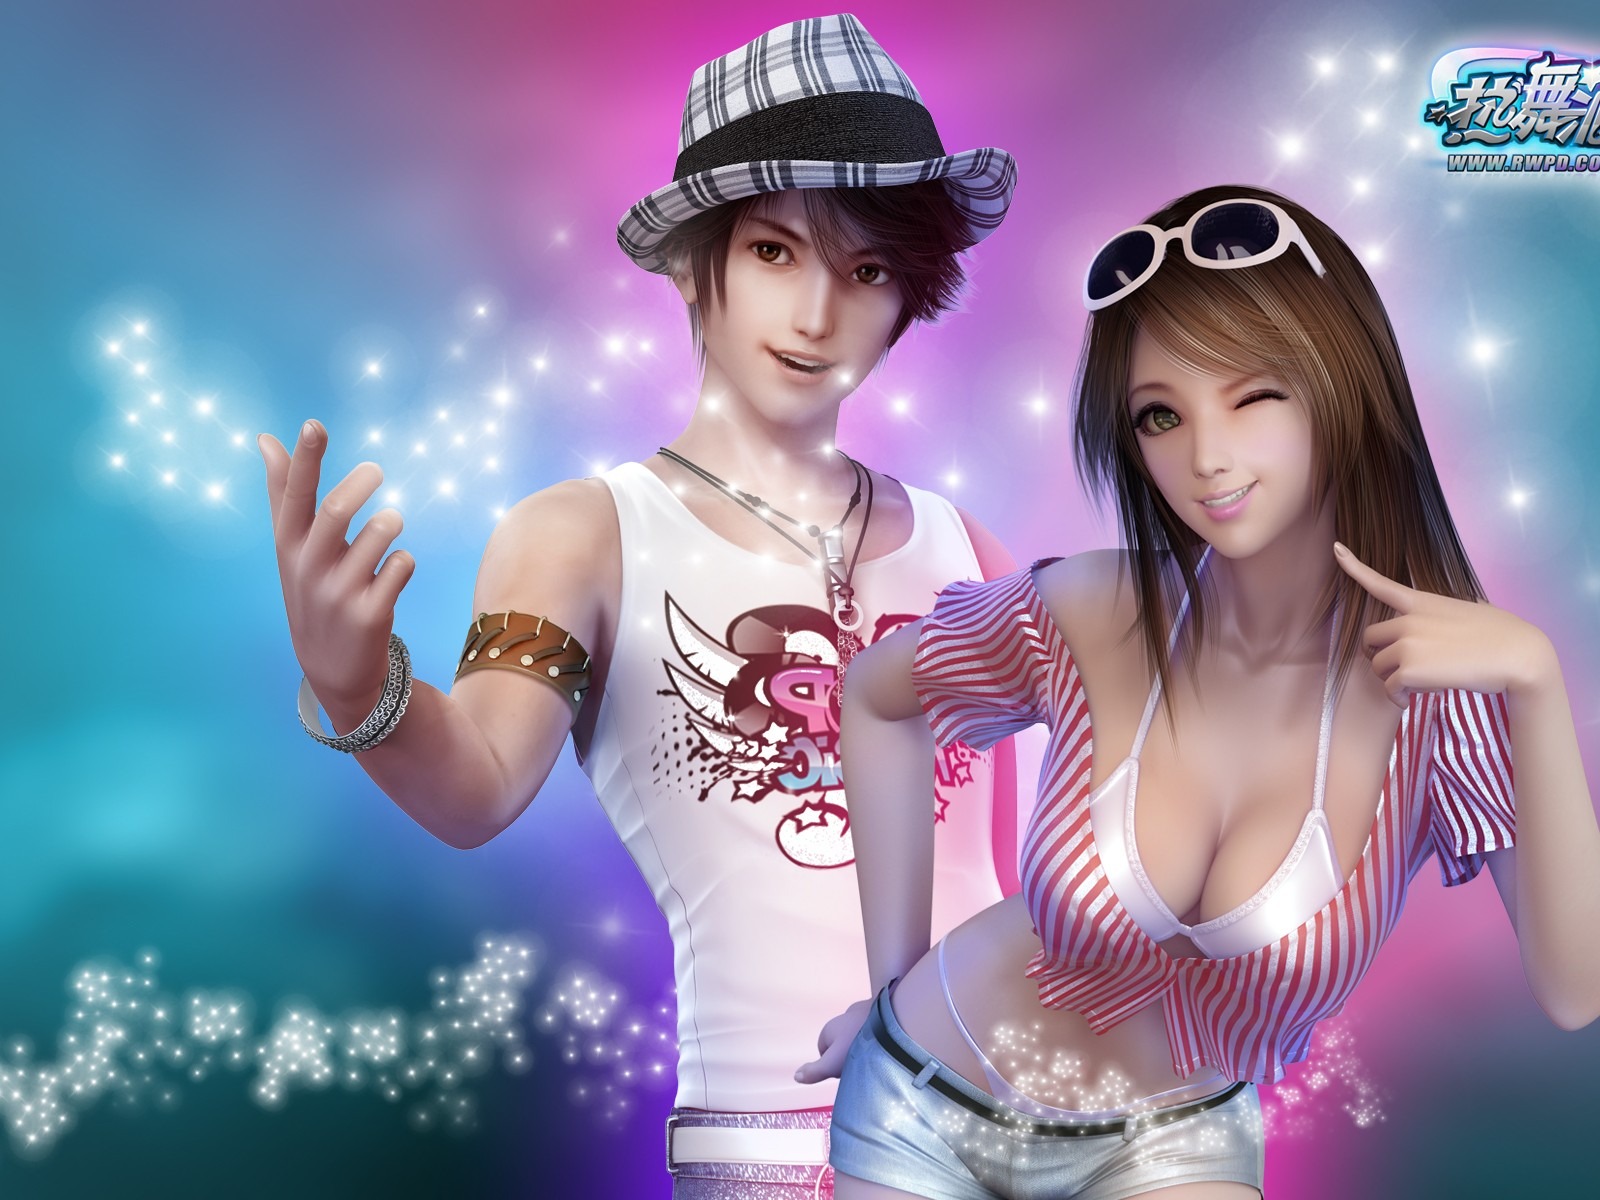 Online game Hot Dance Party II official wallpapers #6 - 1600x1200